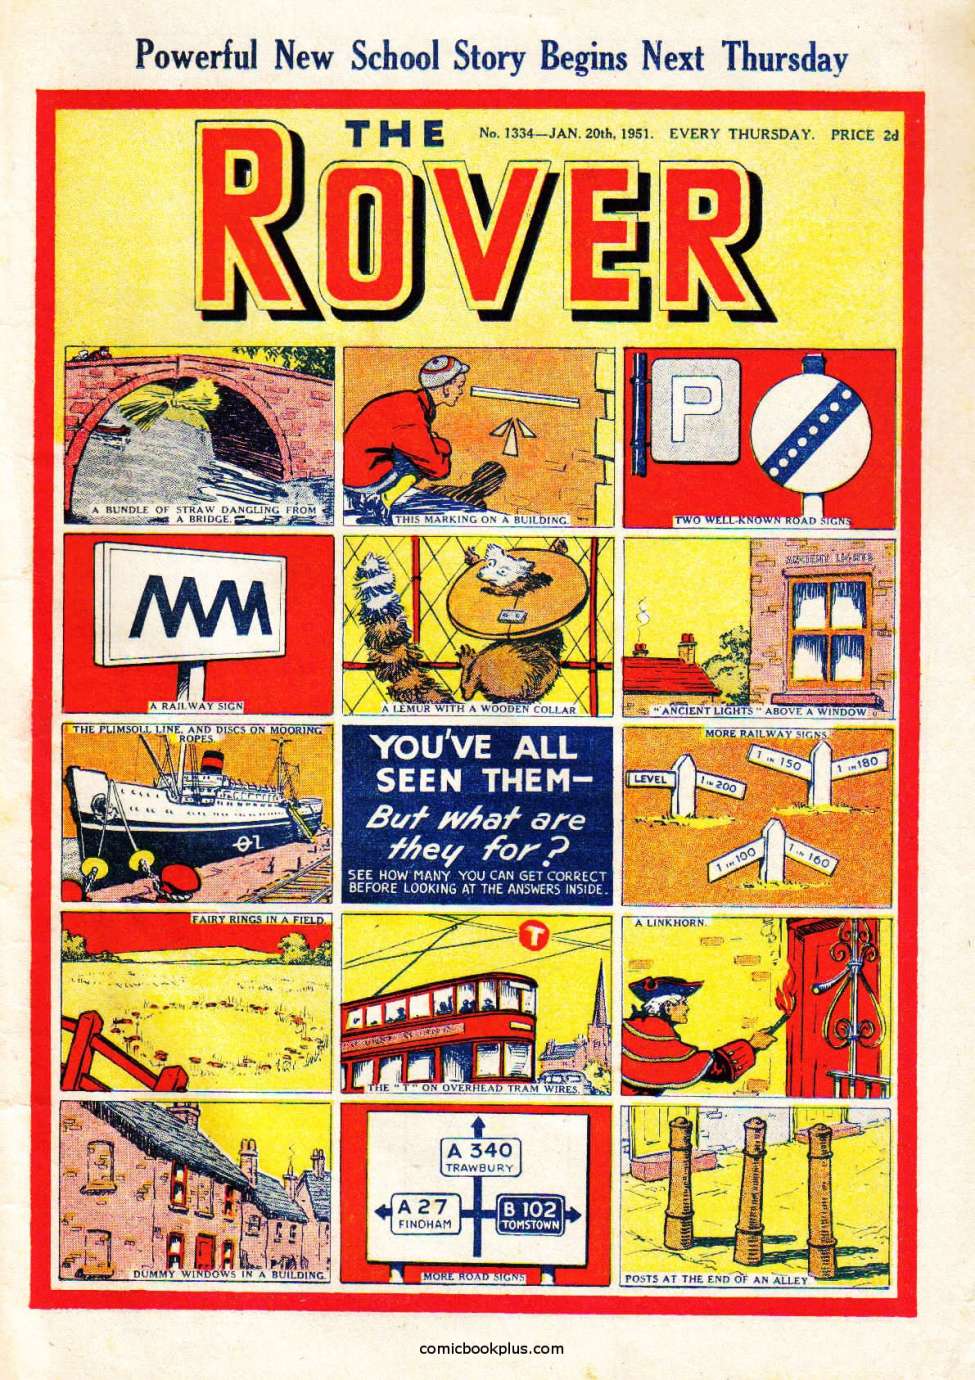 Book Cover For The Rover 1334